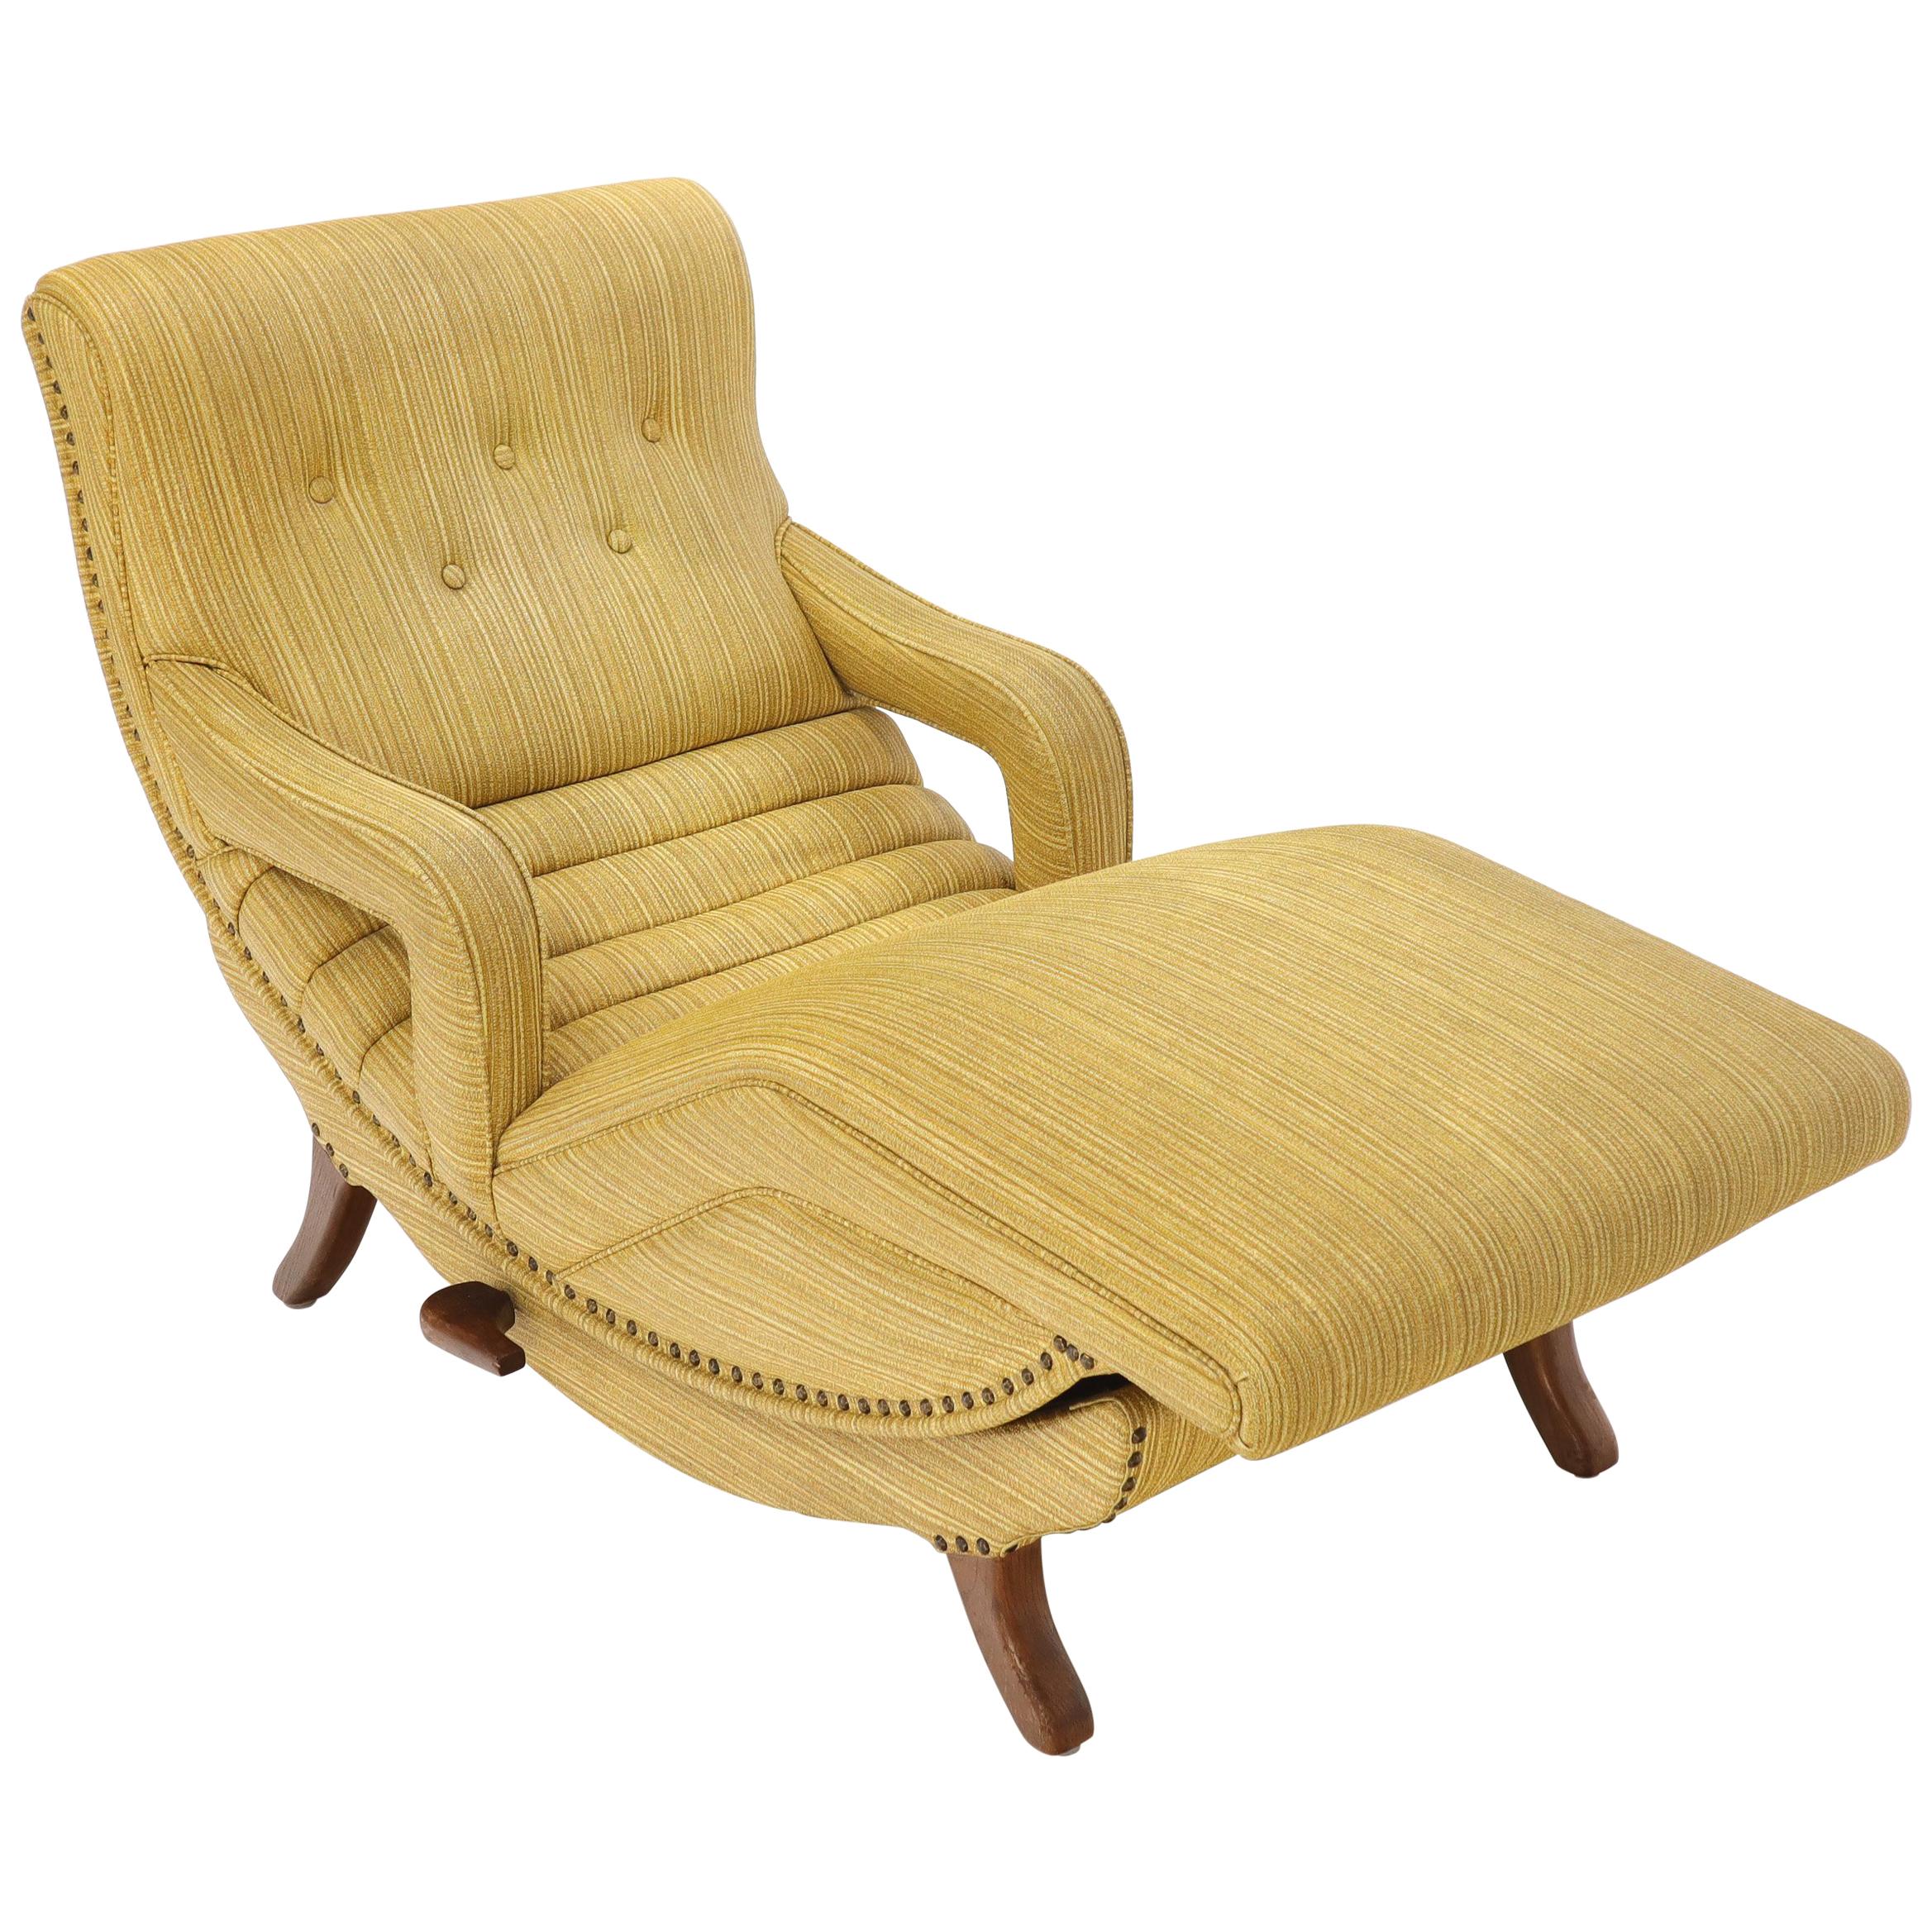 Yellow Upholstery Super Clean Original Condition Adjustable Lounge Chair